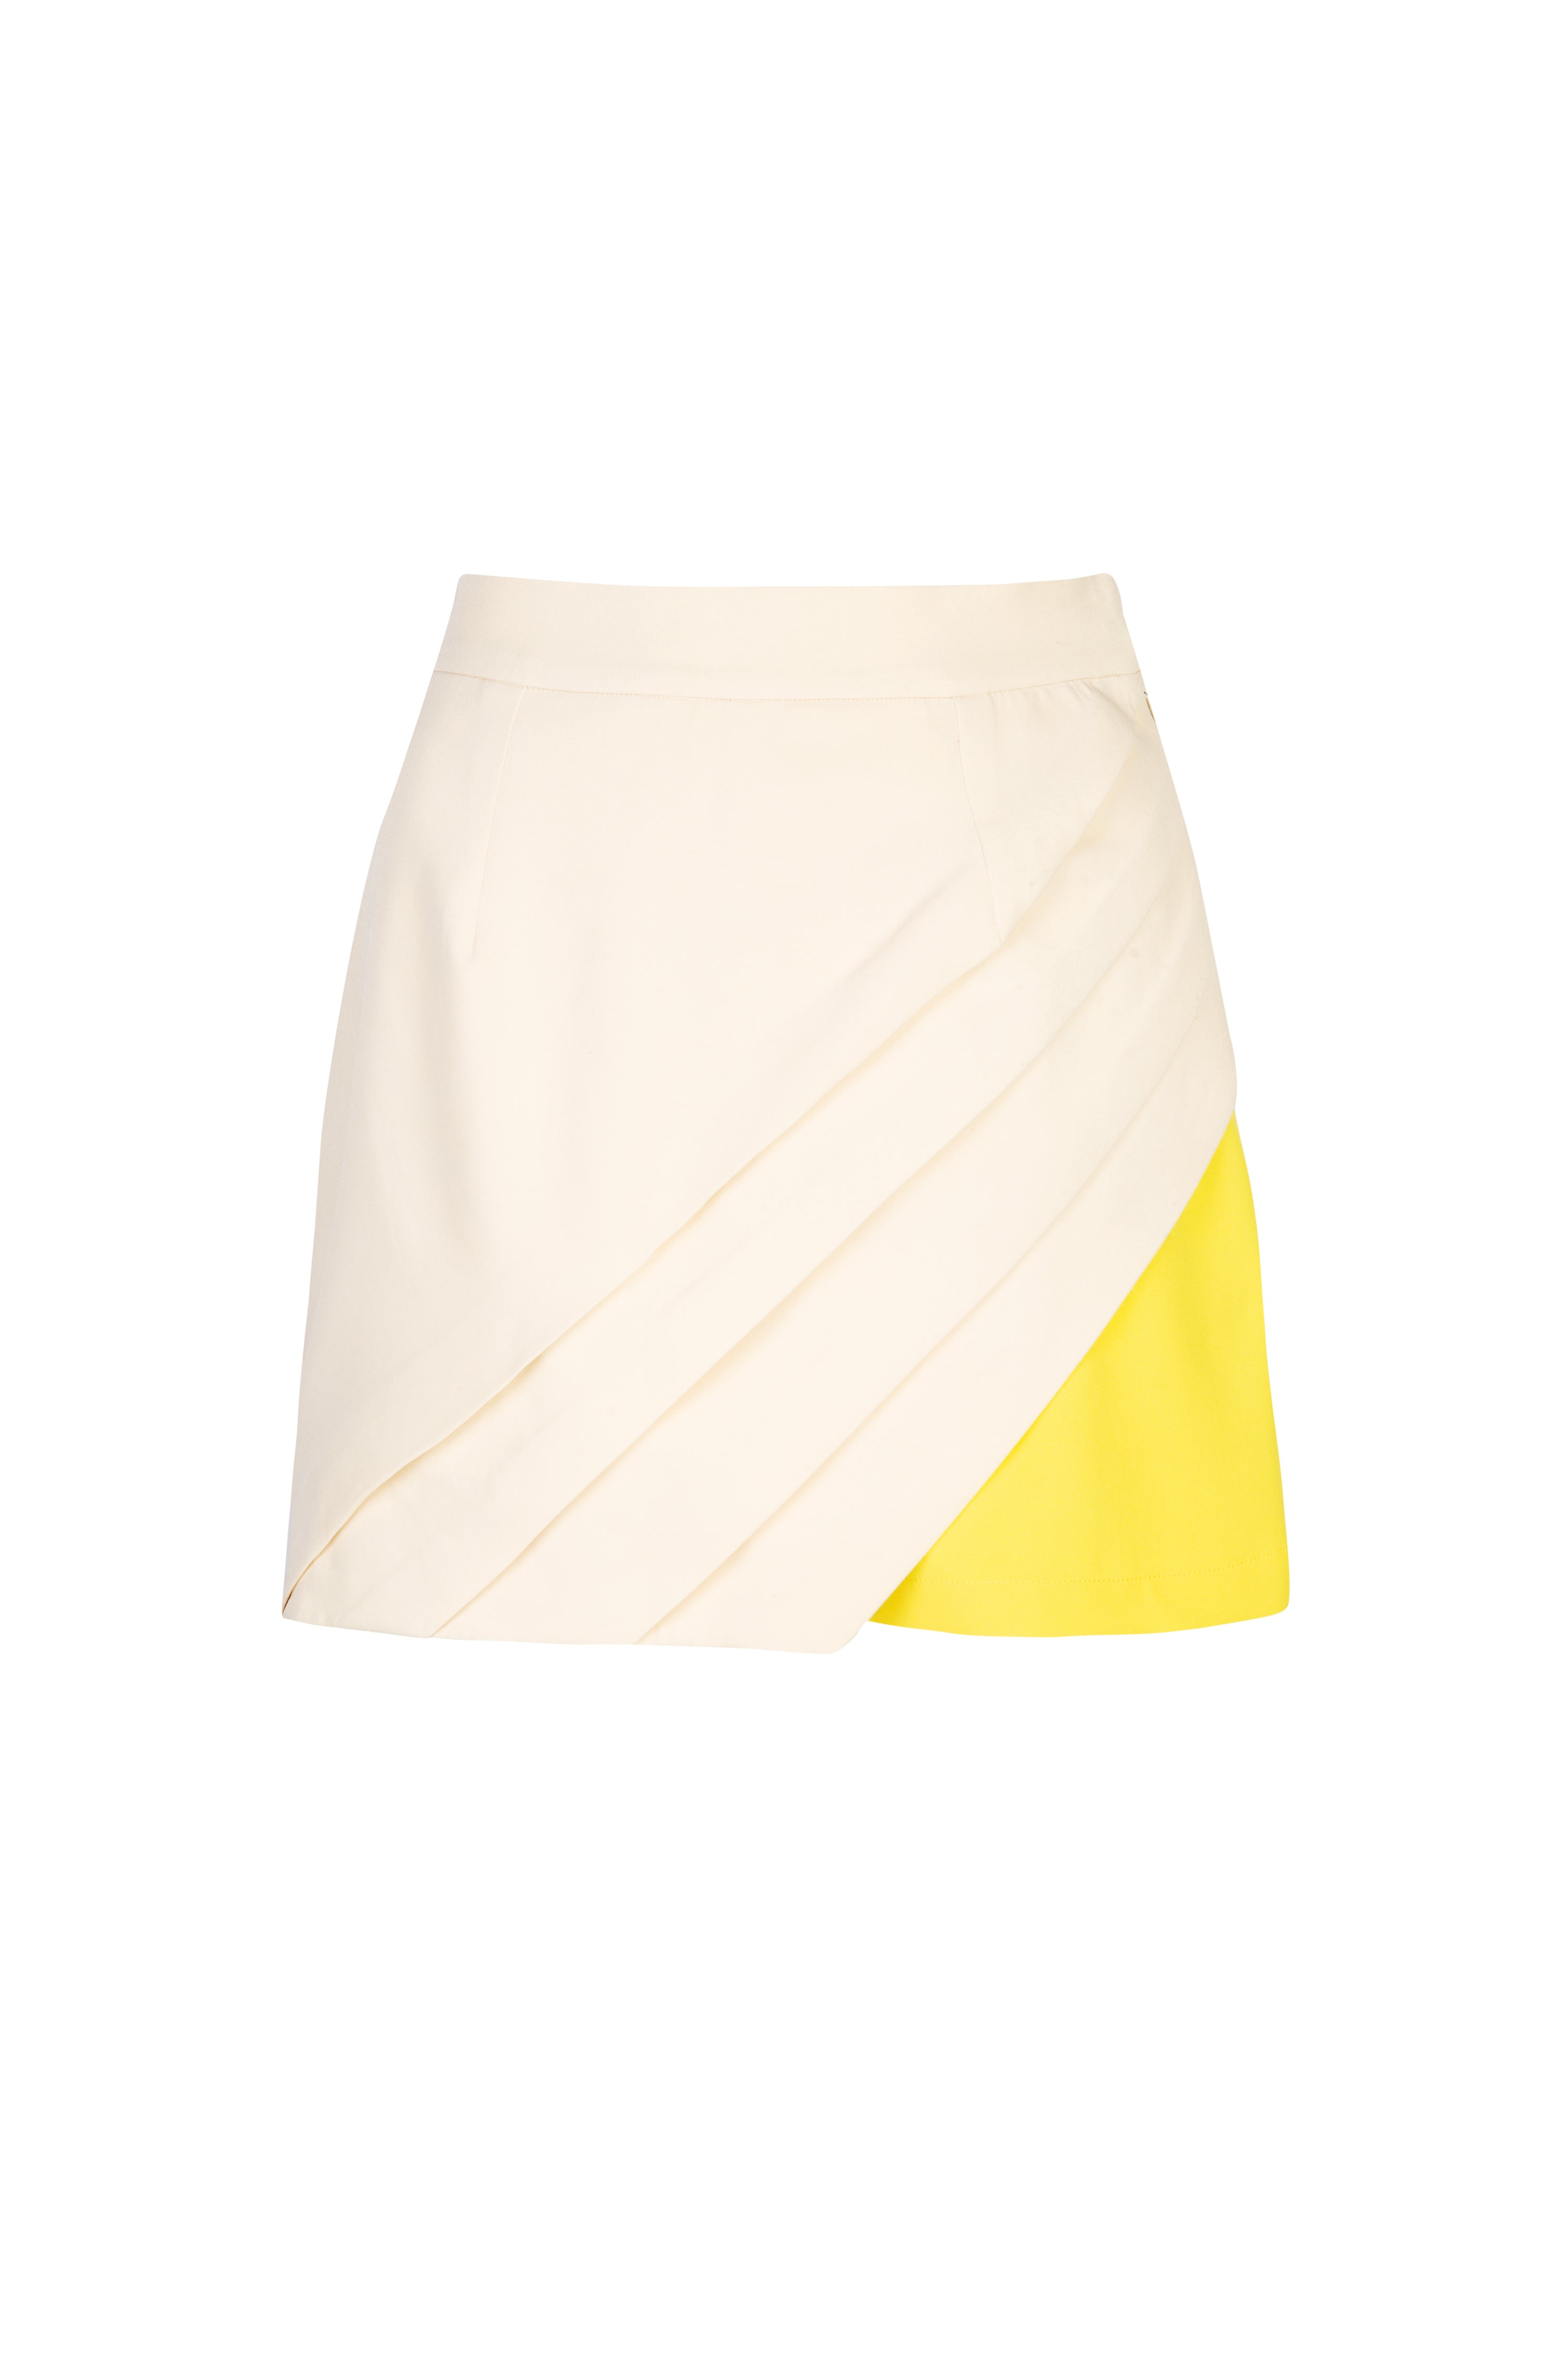 Cream pleated long panel with yellow shorts underneath, pocket and waistband